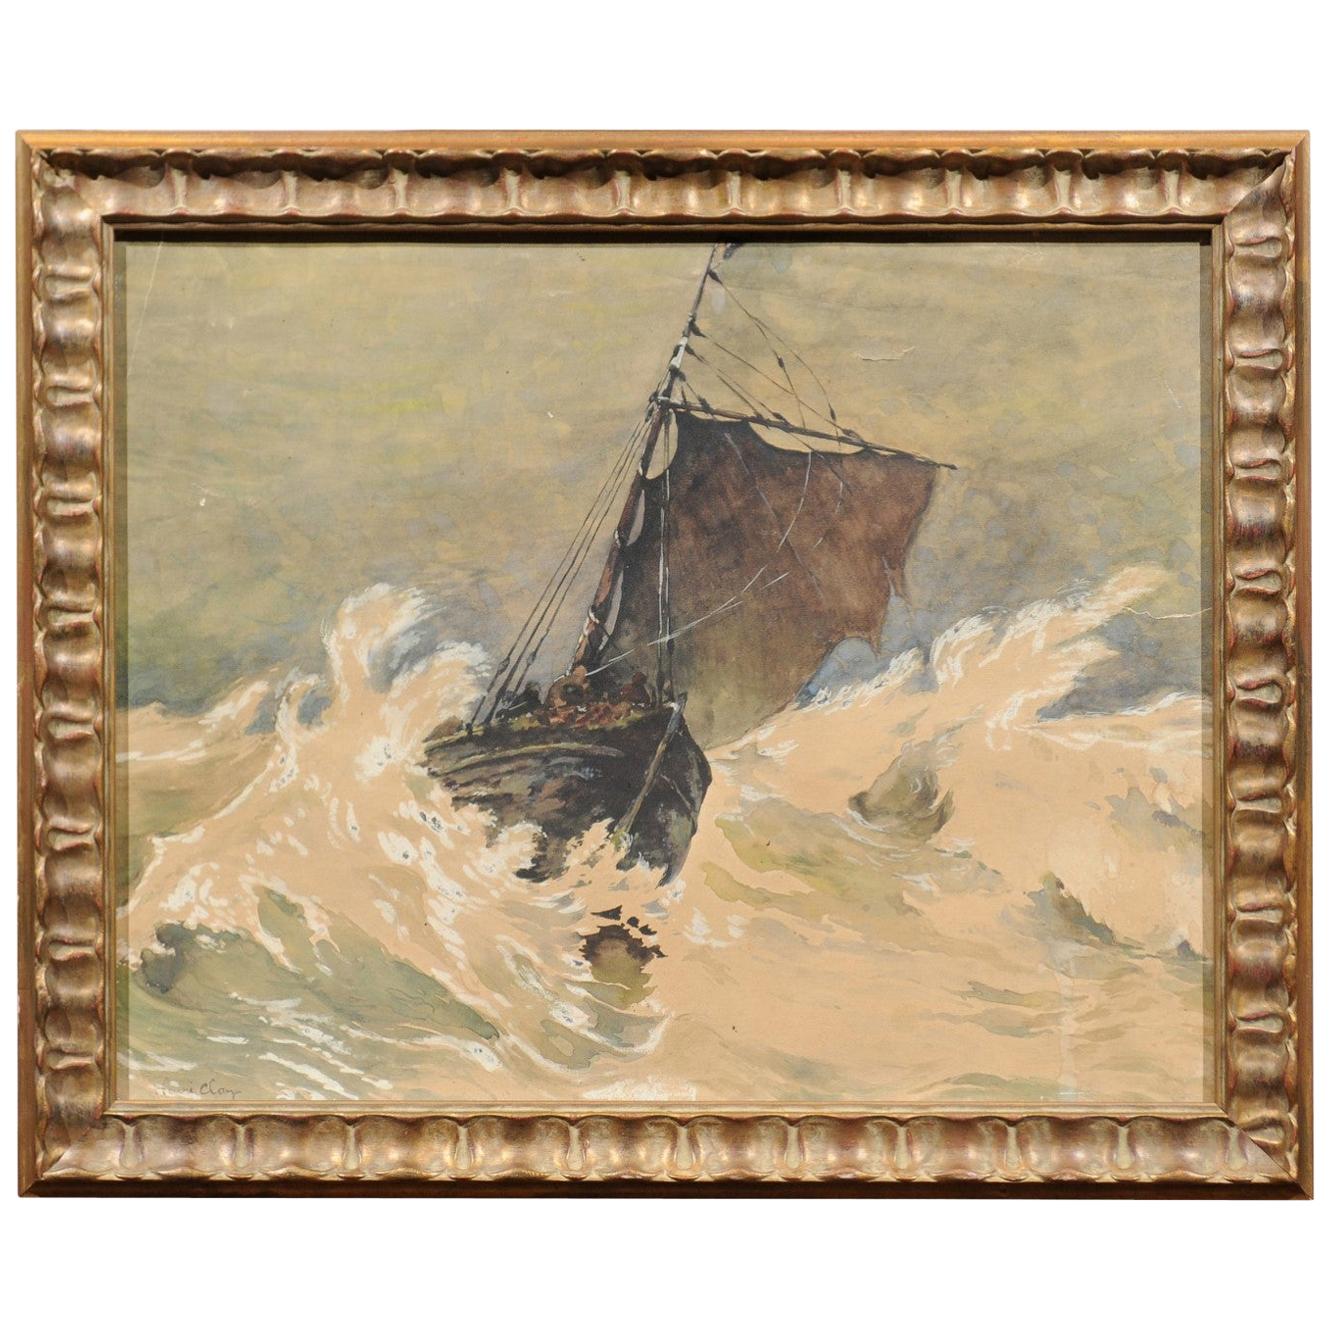 Framed  Watercolor of Sailboat in a Storm, Henry Clay, 1917